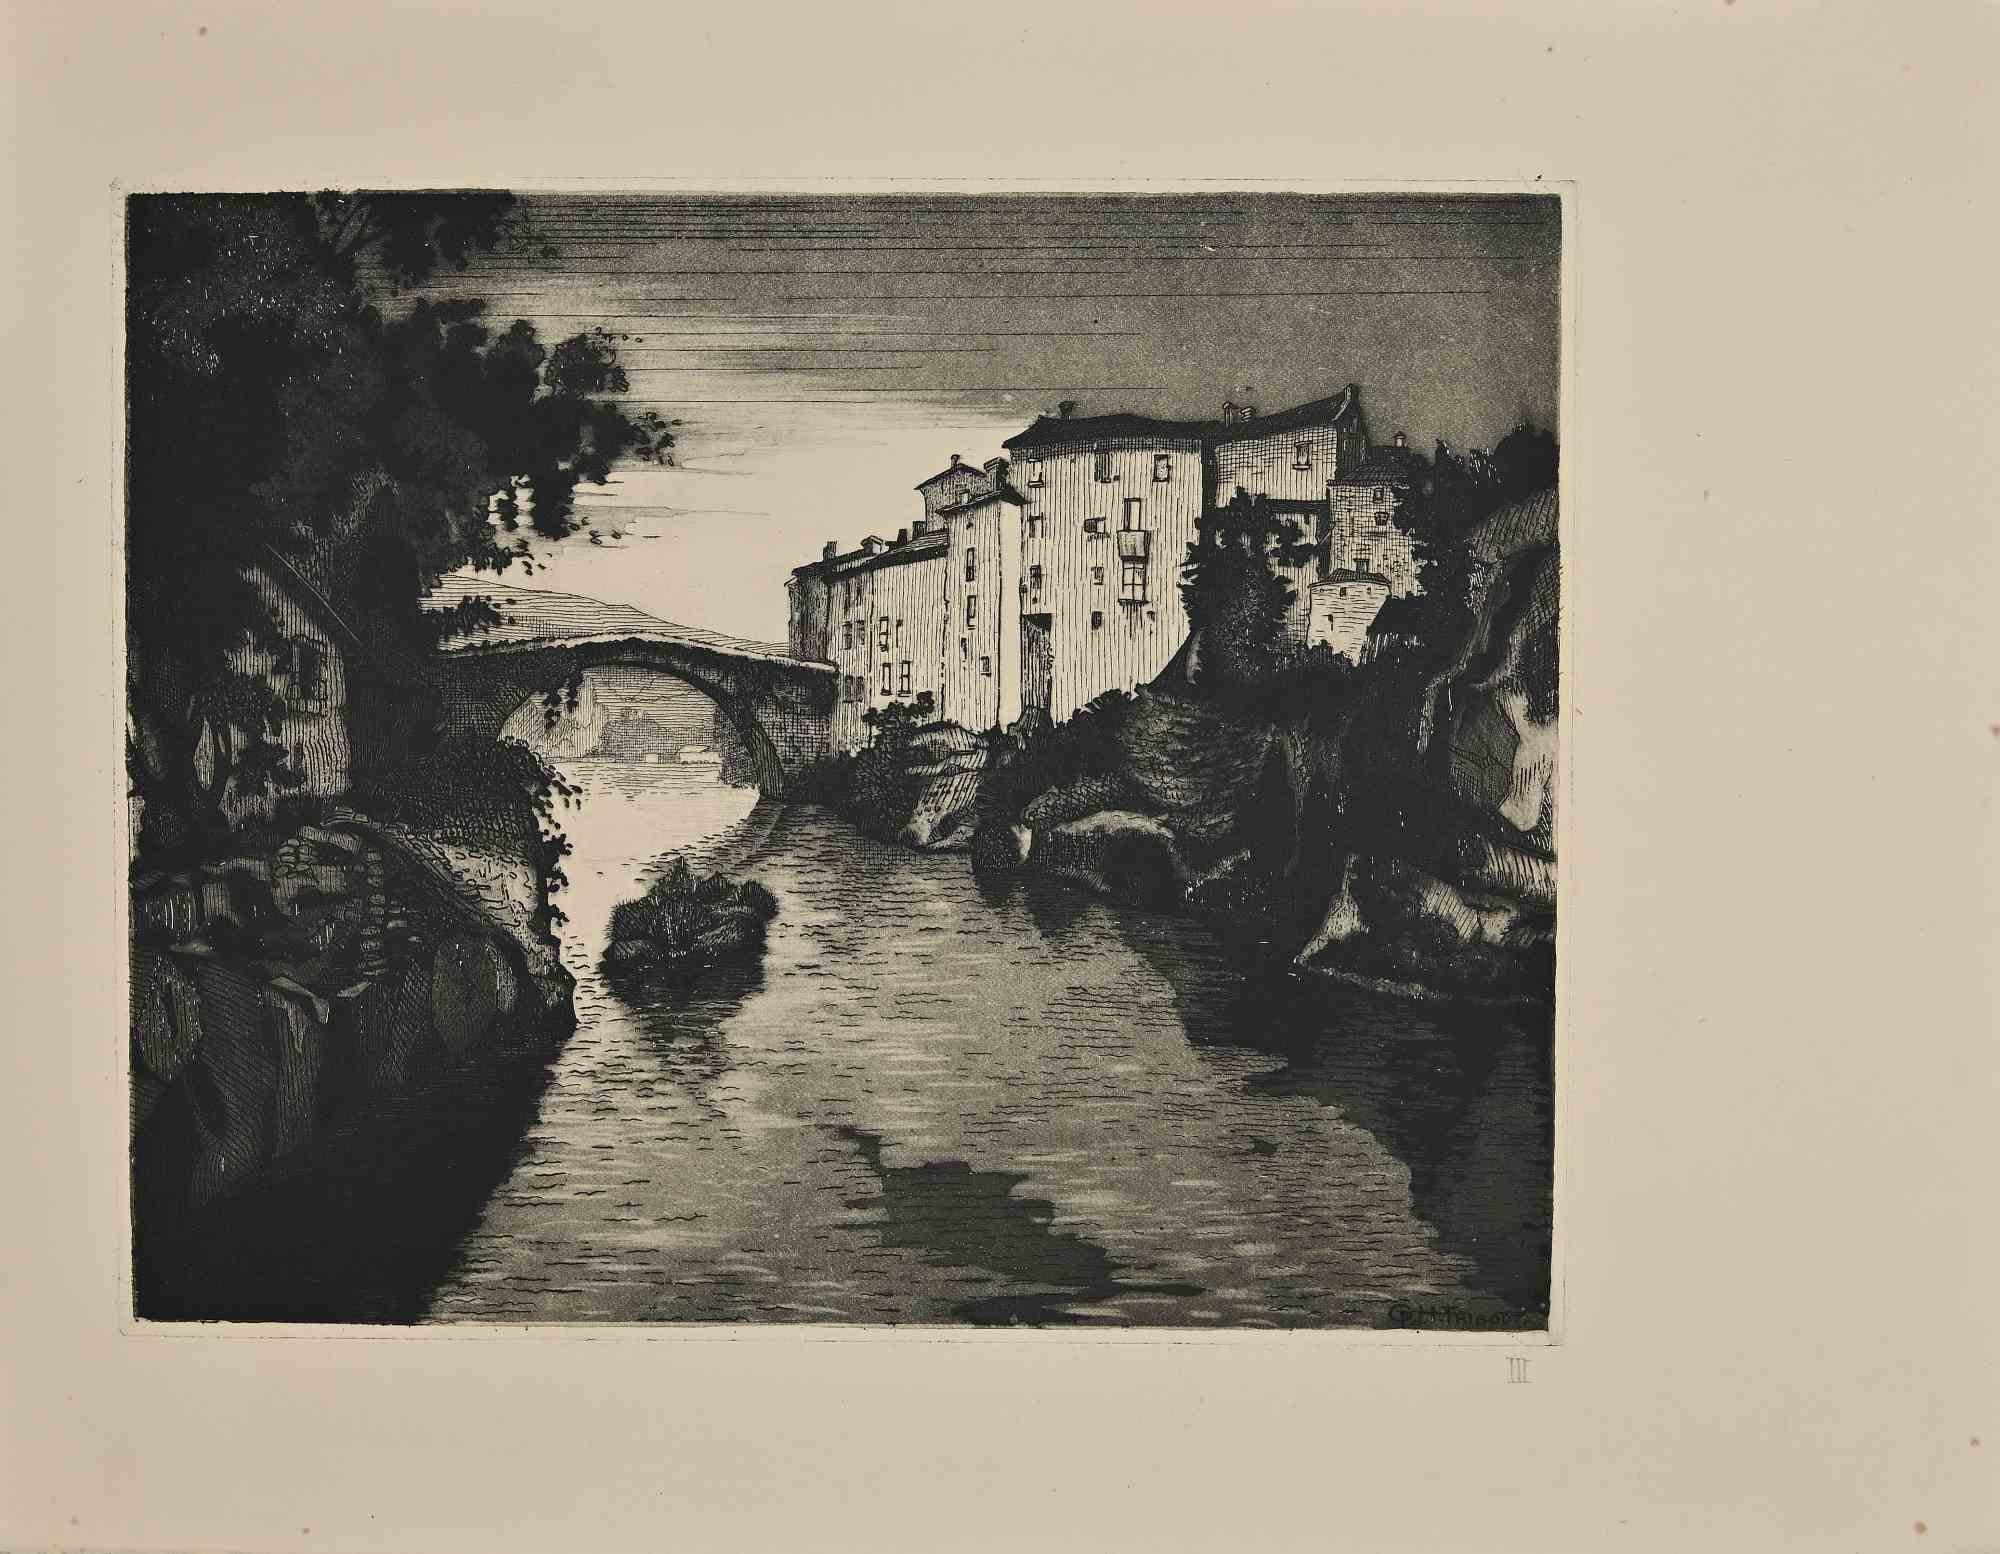 Georges-Henri Tribout Landscape Print - View of the River - Etching by George-Henri Tribout - Early 20th Century